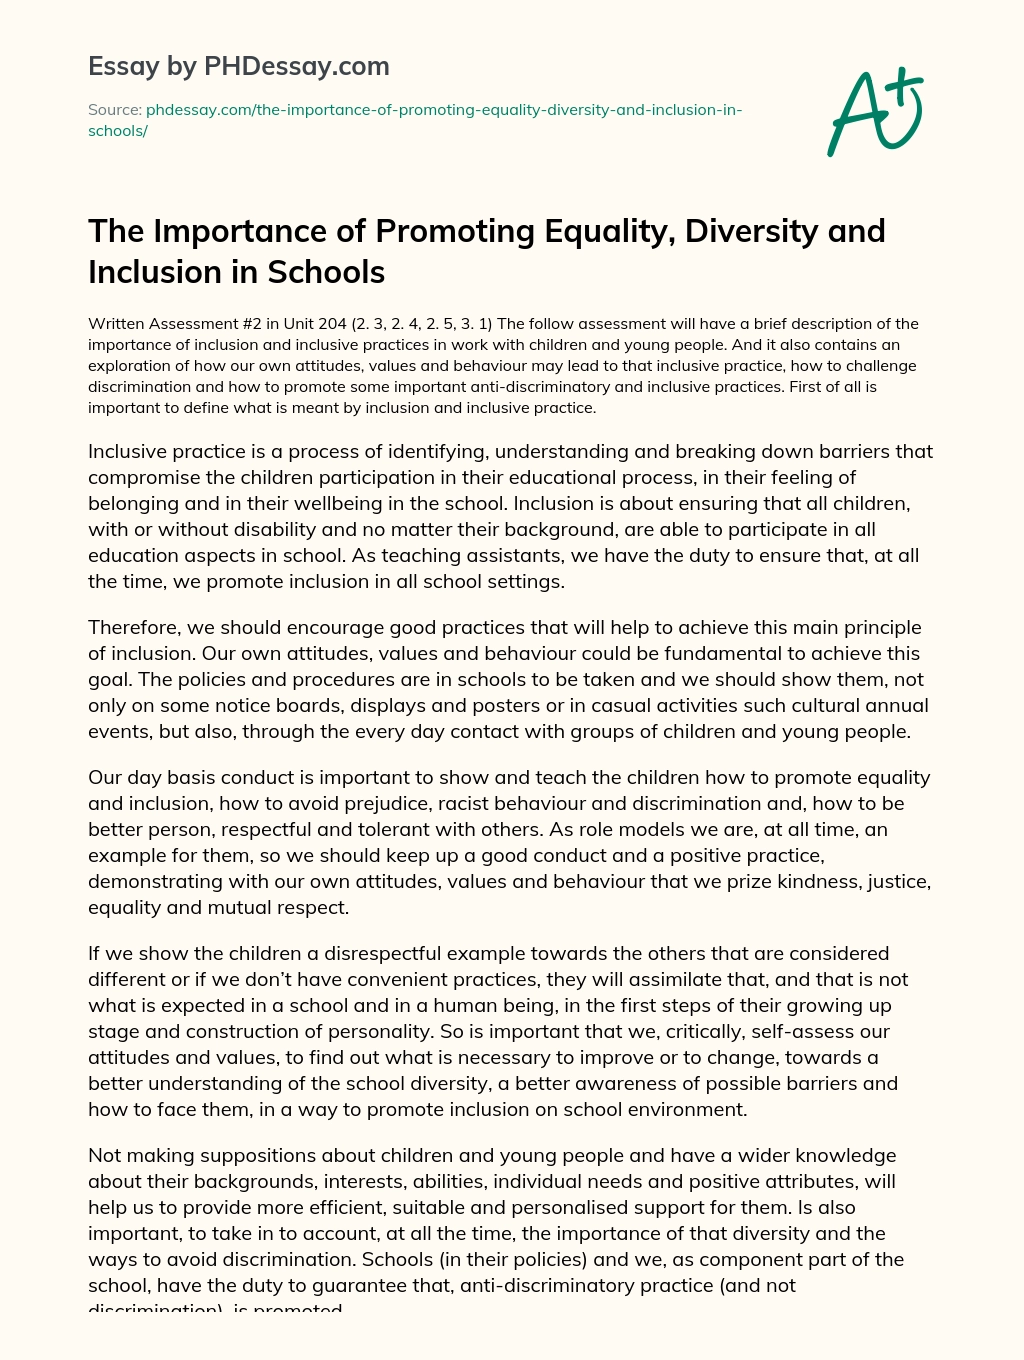 The Importance of Promoting Equality, Diversity and Inclusion in Schools essay